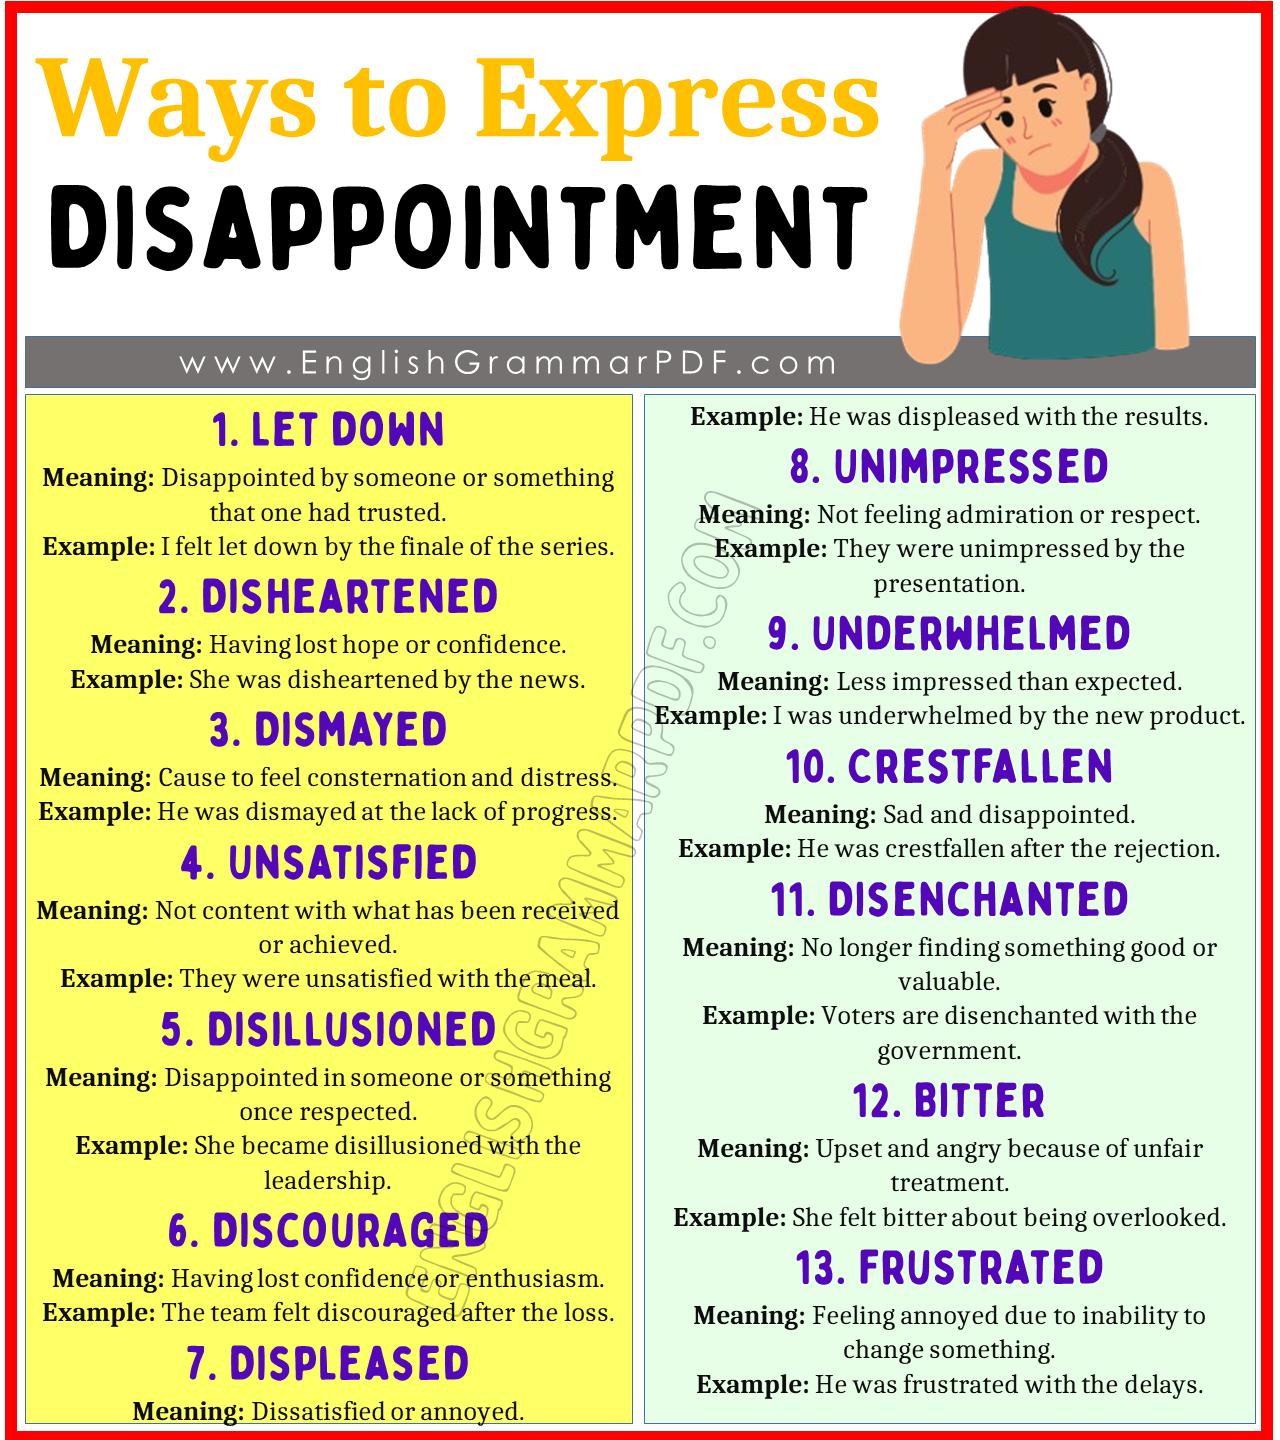 Ways to Express Disappointment